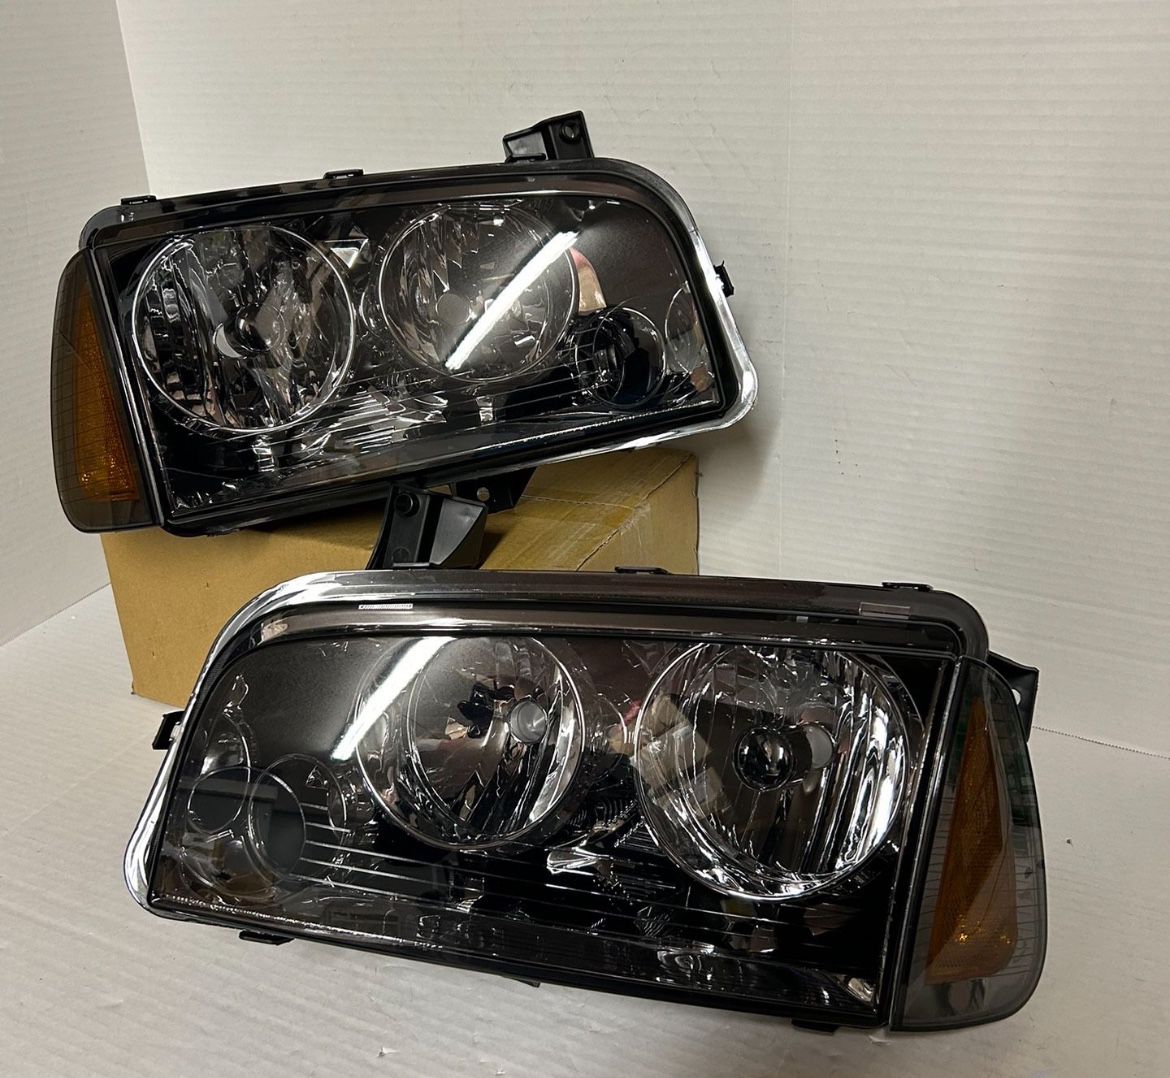 Headlights 2005/2010 Dodge Charger 